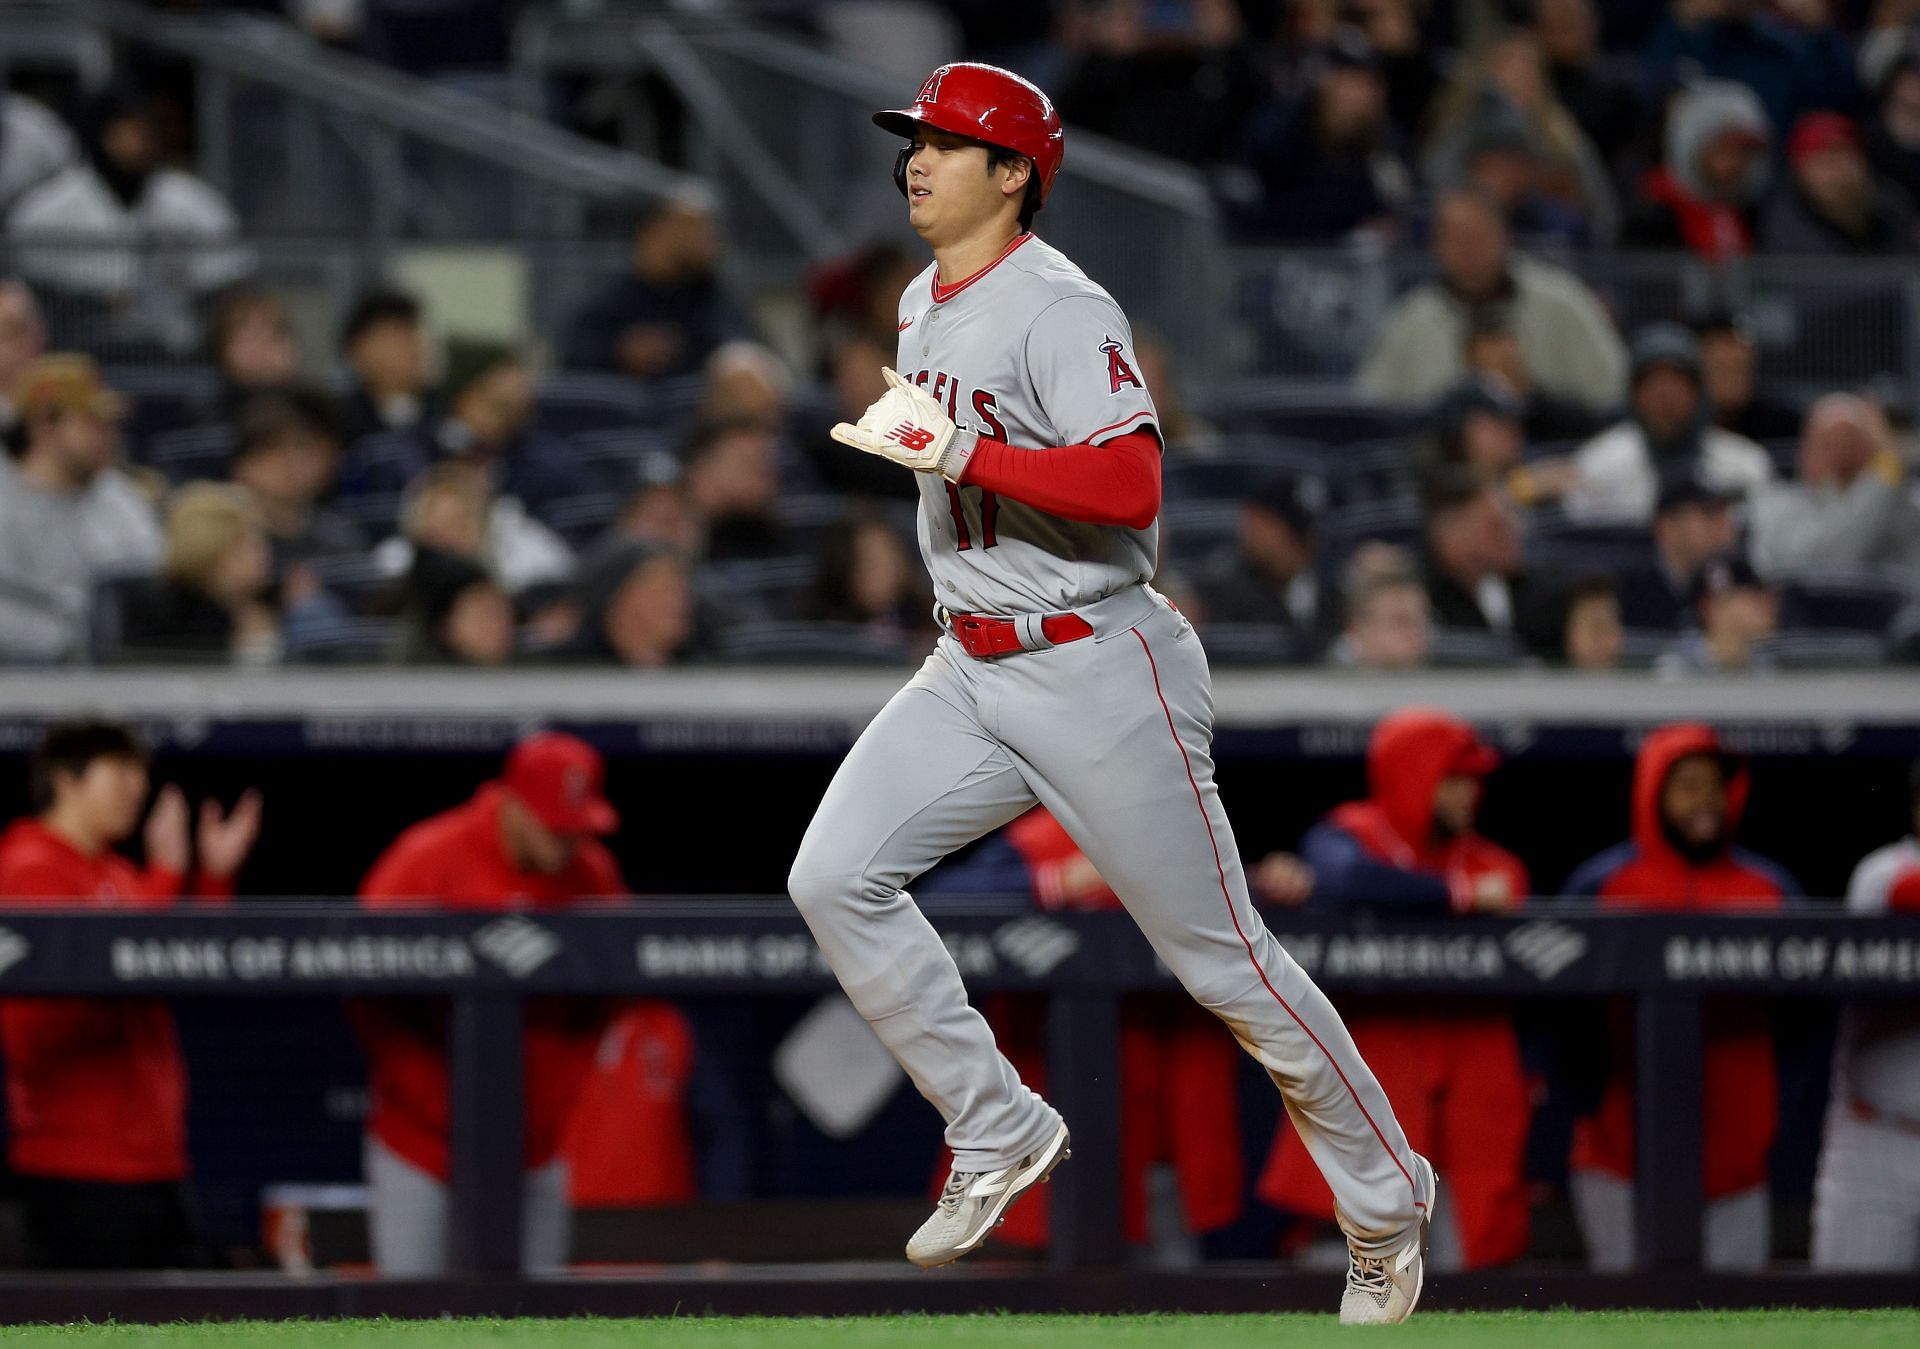 Shohei Ohtani #17 of the Los Angeles Angels scores in the fifth inning against the New York Yankees at Yankee Stadium on April 18, 2023 in the Bronx borough of New York City